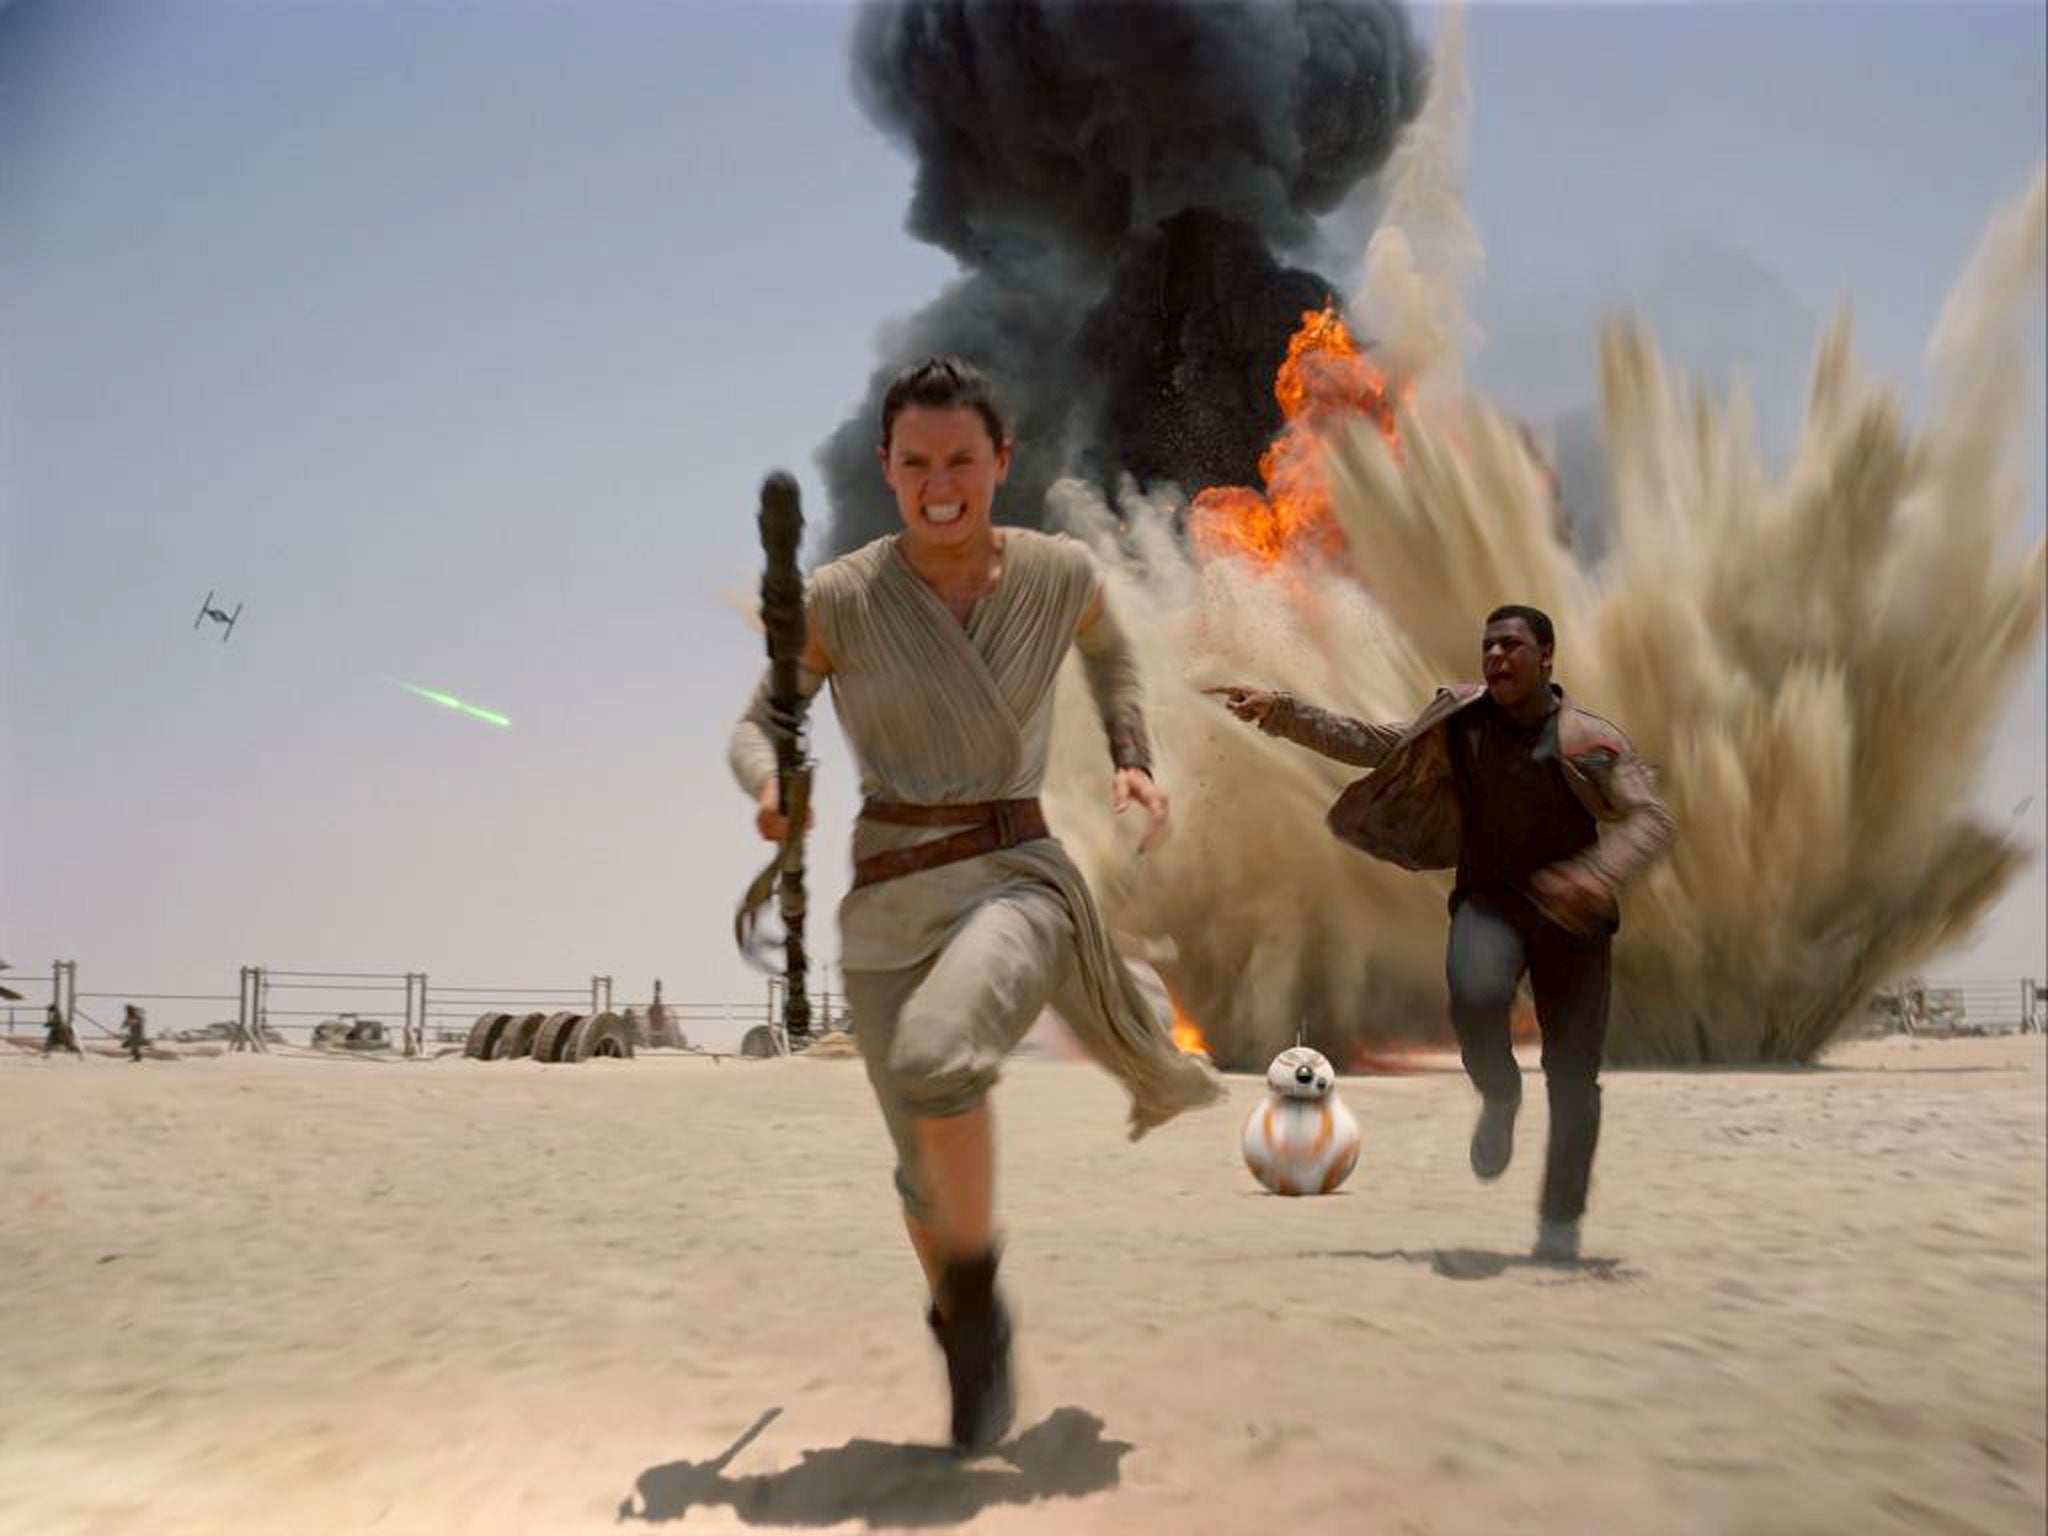 The seventh movie in the series, The Force Awakens, will be released in December